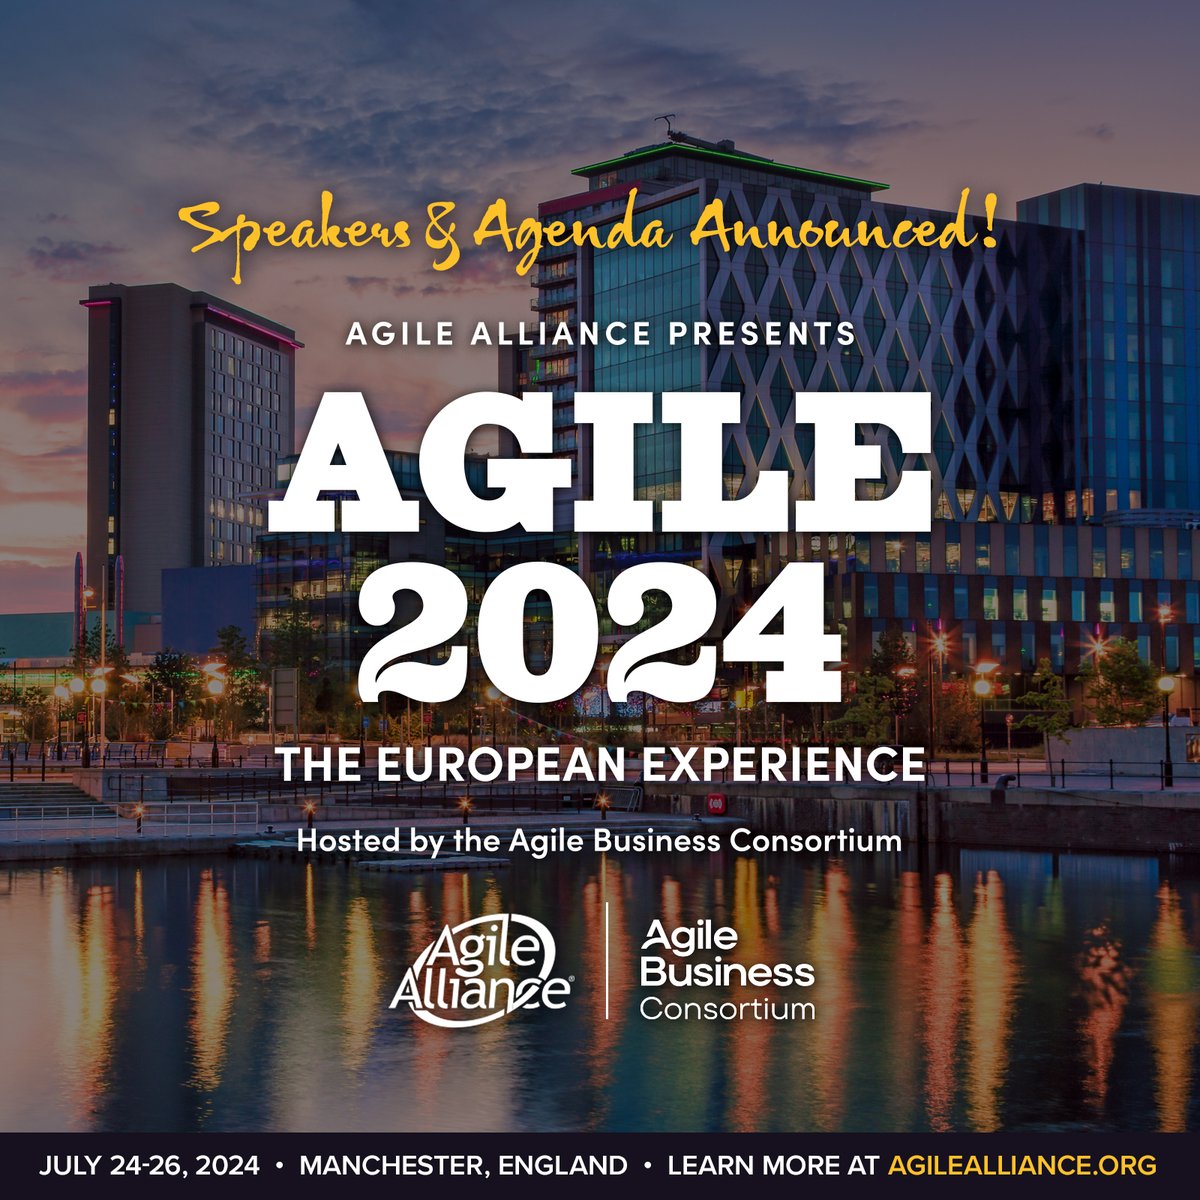 We're excited to announce the Speakers and Agenda for 'Agile2024 – The European Experience!' You can now learn more, view the full agenda, and register for this #Agile2024 parallel conference coming to Manchester on July 24-26! events.agilealliance.org/agile2024-euro… #Agile #Agility